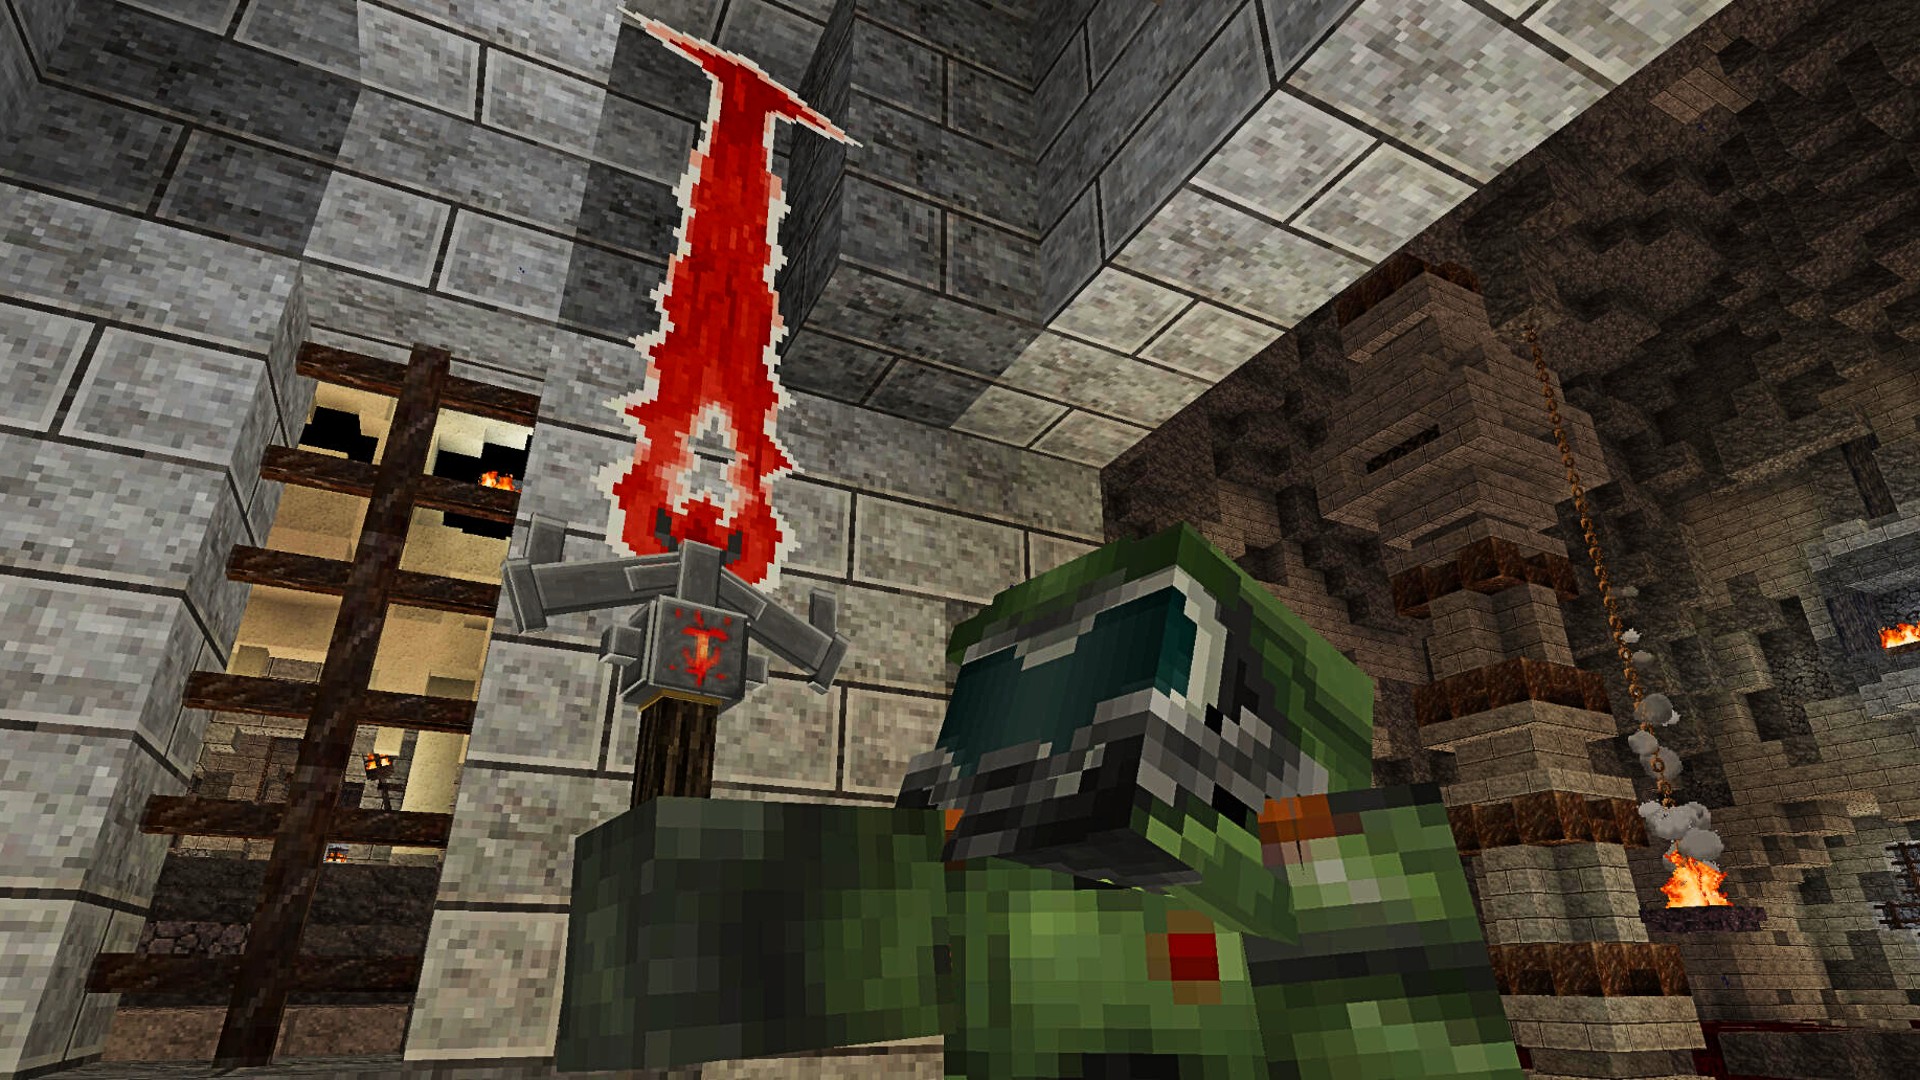 Doom Minecraft Maps with Downloadable Map